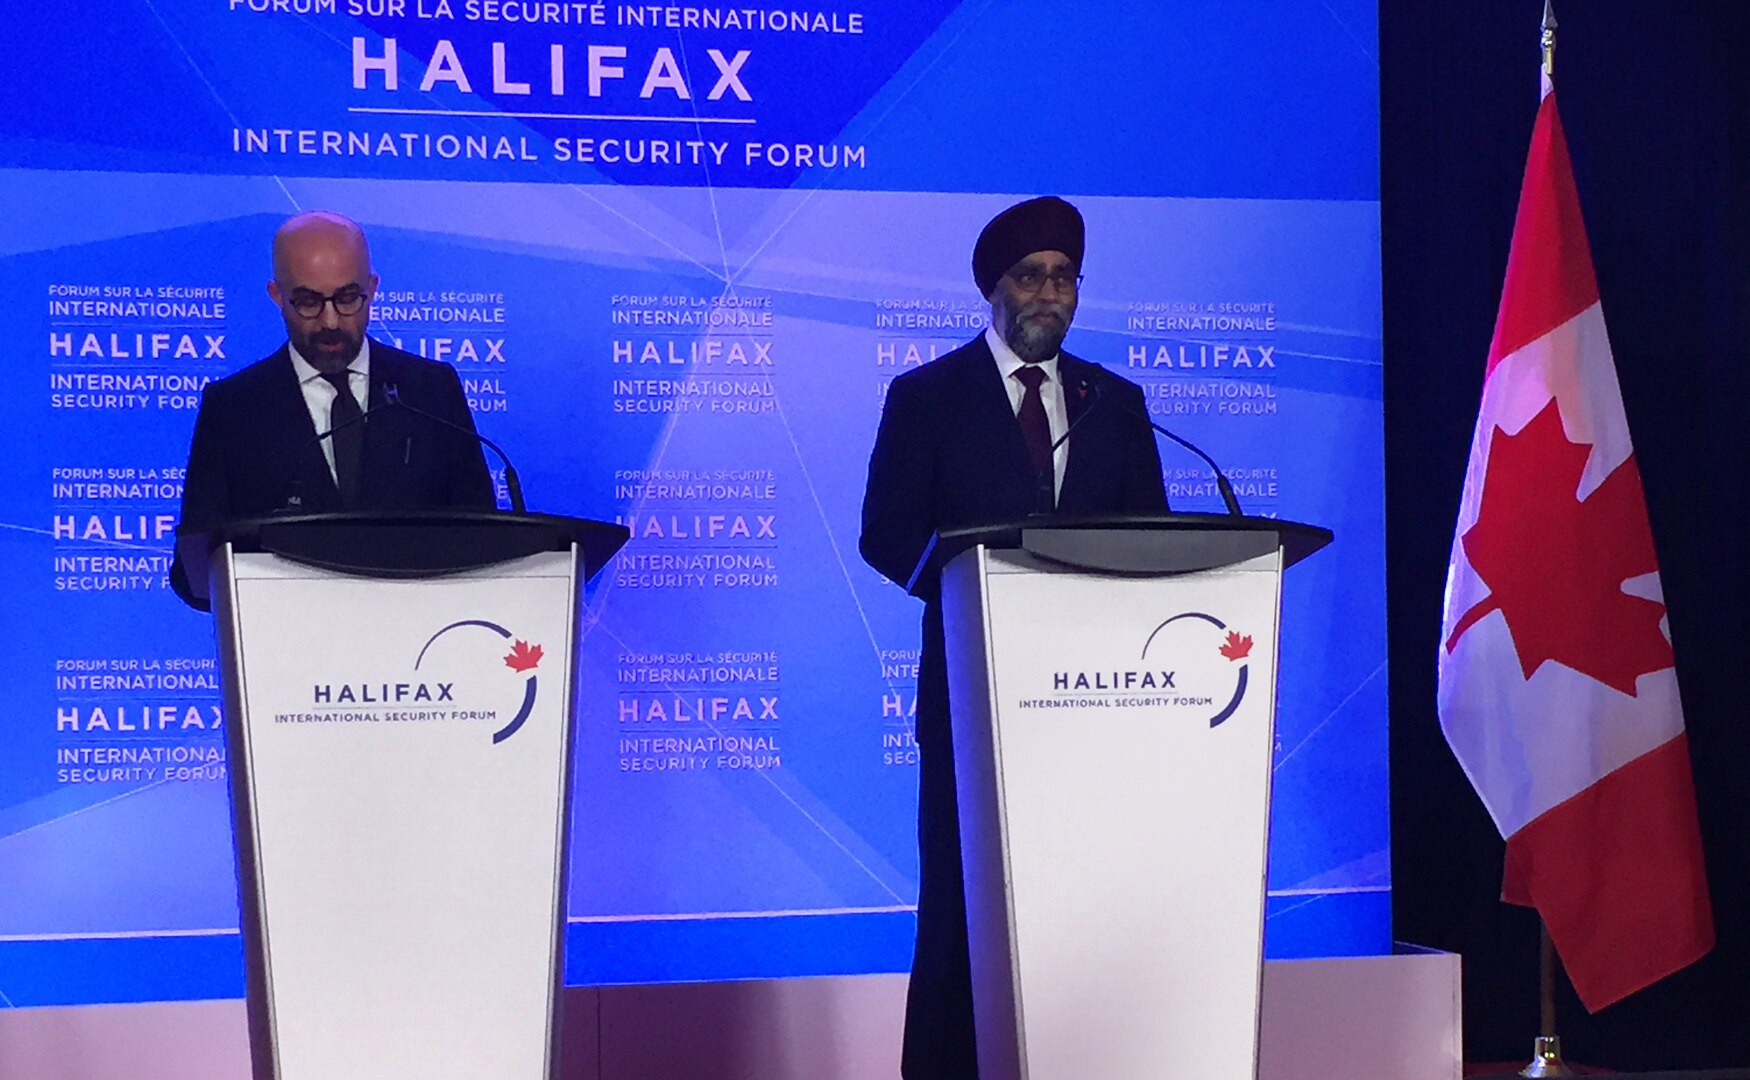 Peter Van Praagh, president of the Halifax Forum, and Canadian Defense Minister Harjit Sajjan discuss security challenges that will be aired at the Halifax International Security Forum during a press conference in Halifax, Nova Scotia.